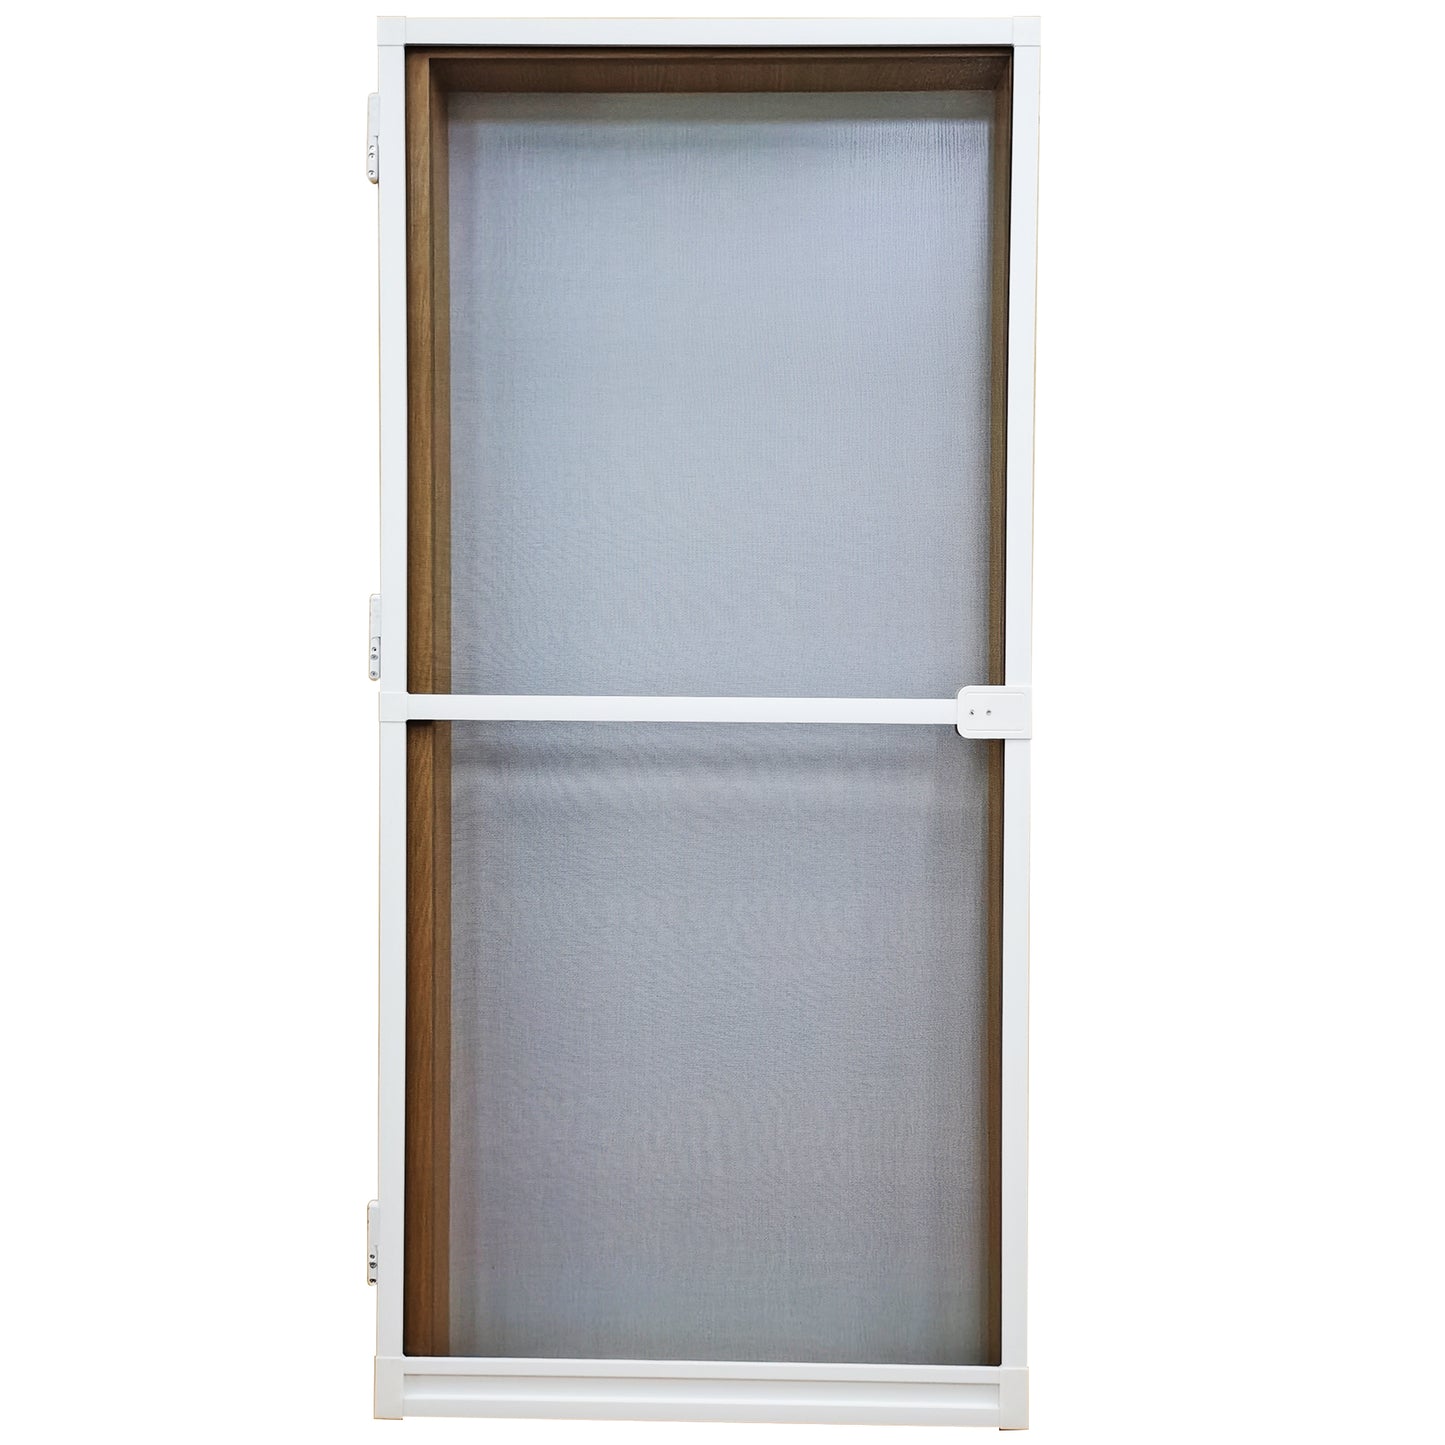 PALMAT Hinged Door Fly Screen Grille cut to size in White, Brown & Black